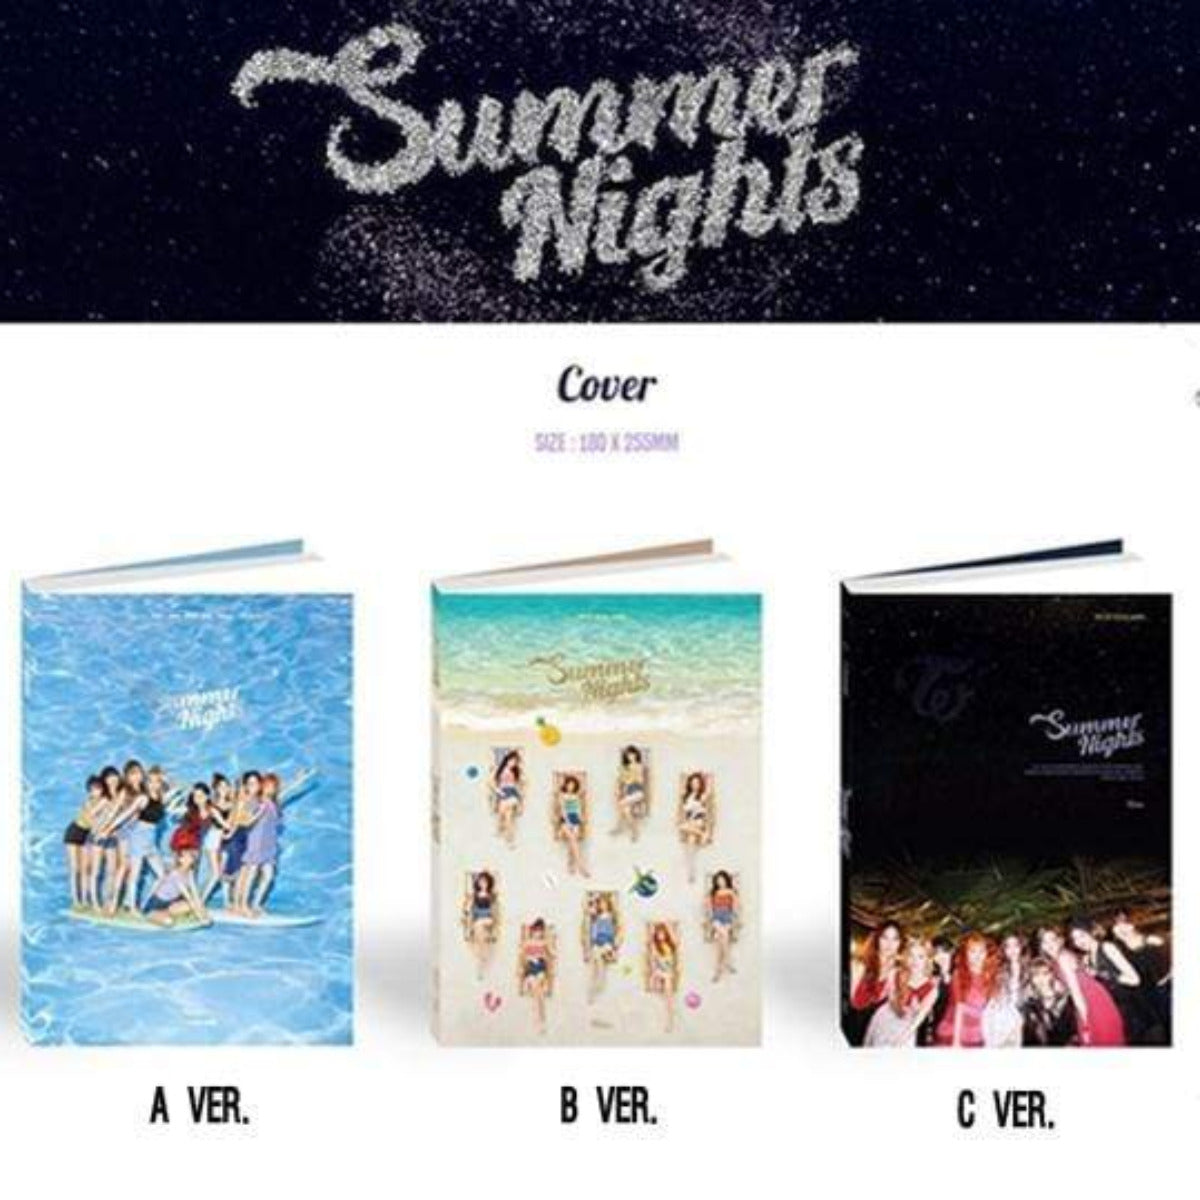 TWICE SUMMER NIGHTS SPECIAL VOL.2